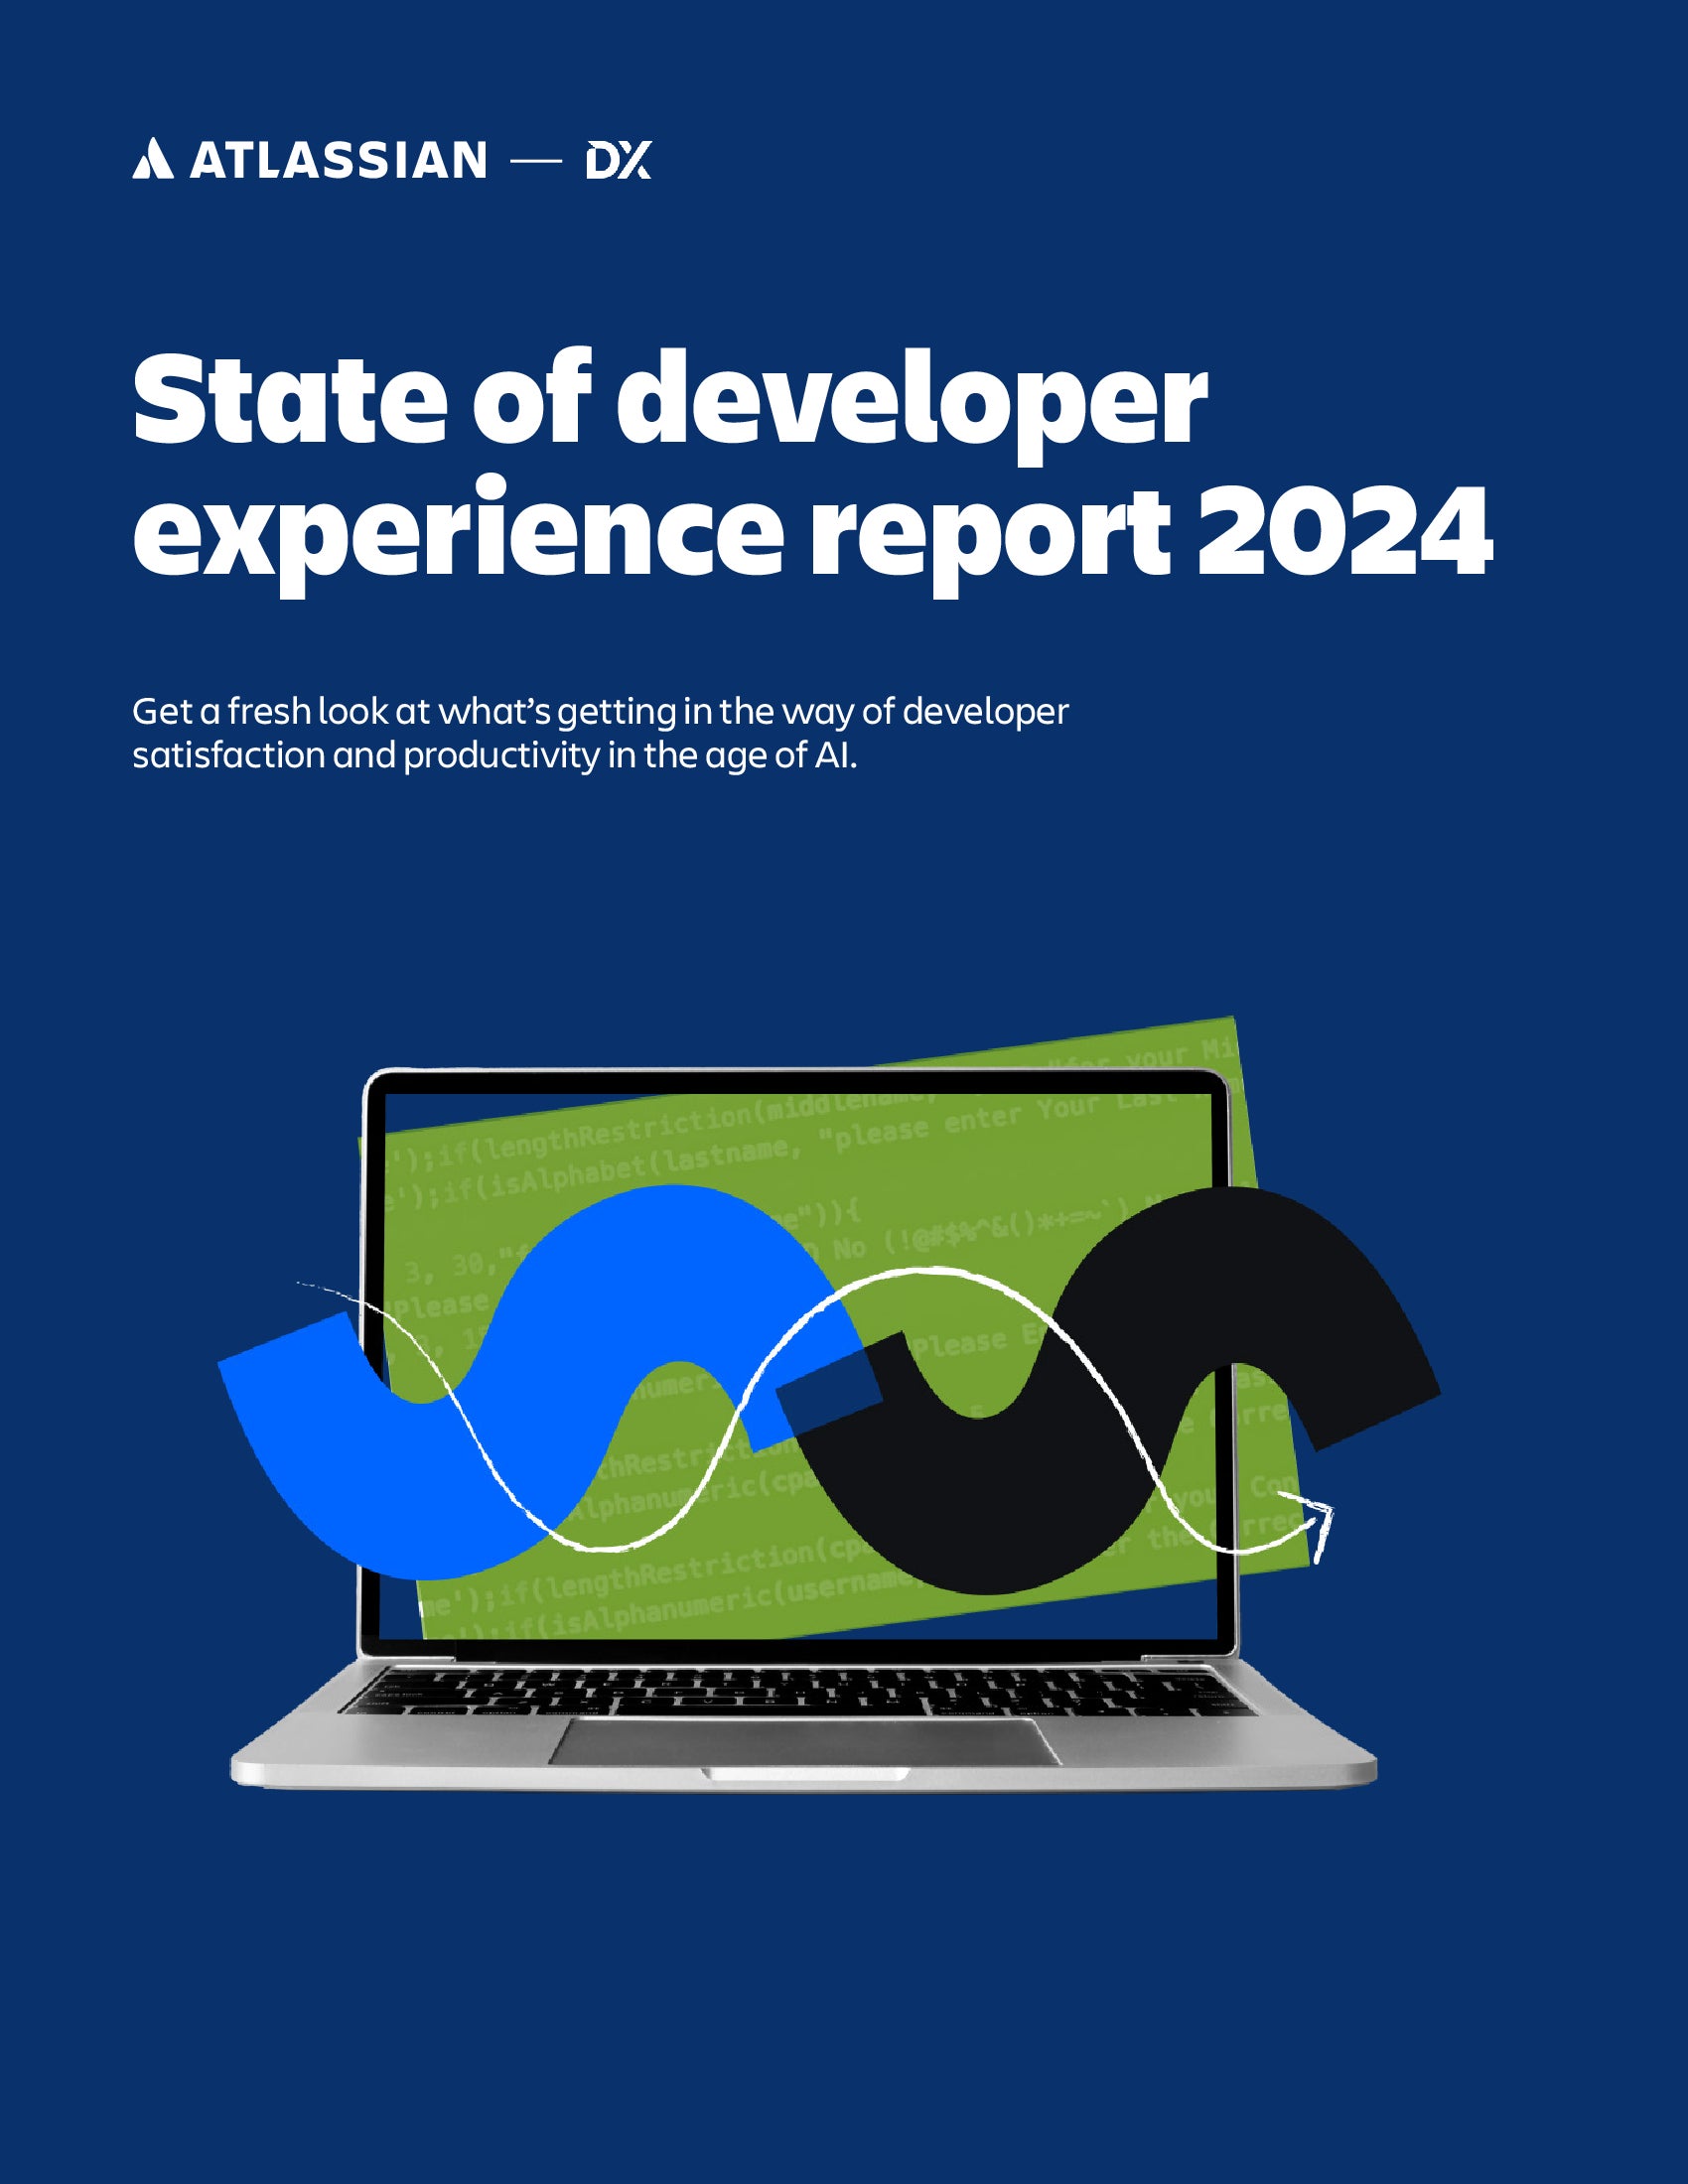 2024 state of developer experience report.